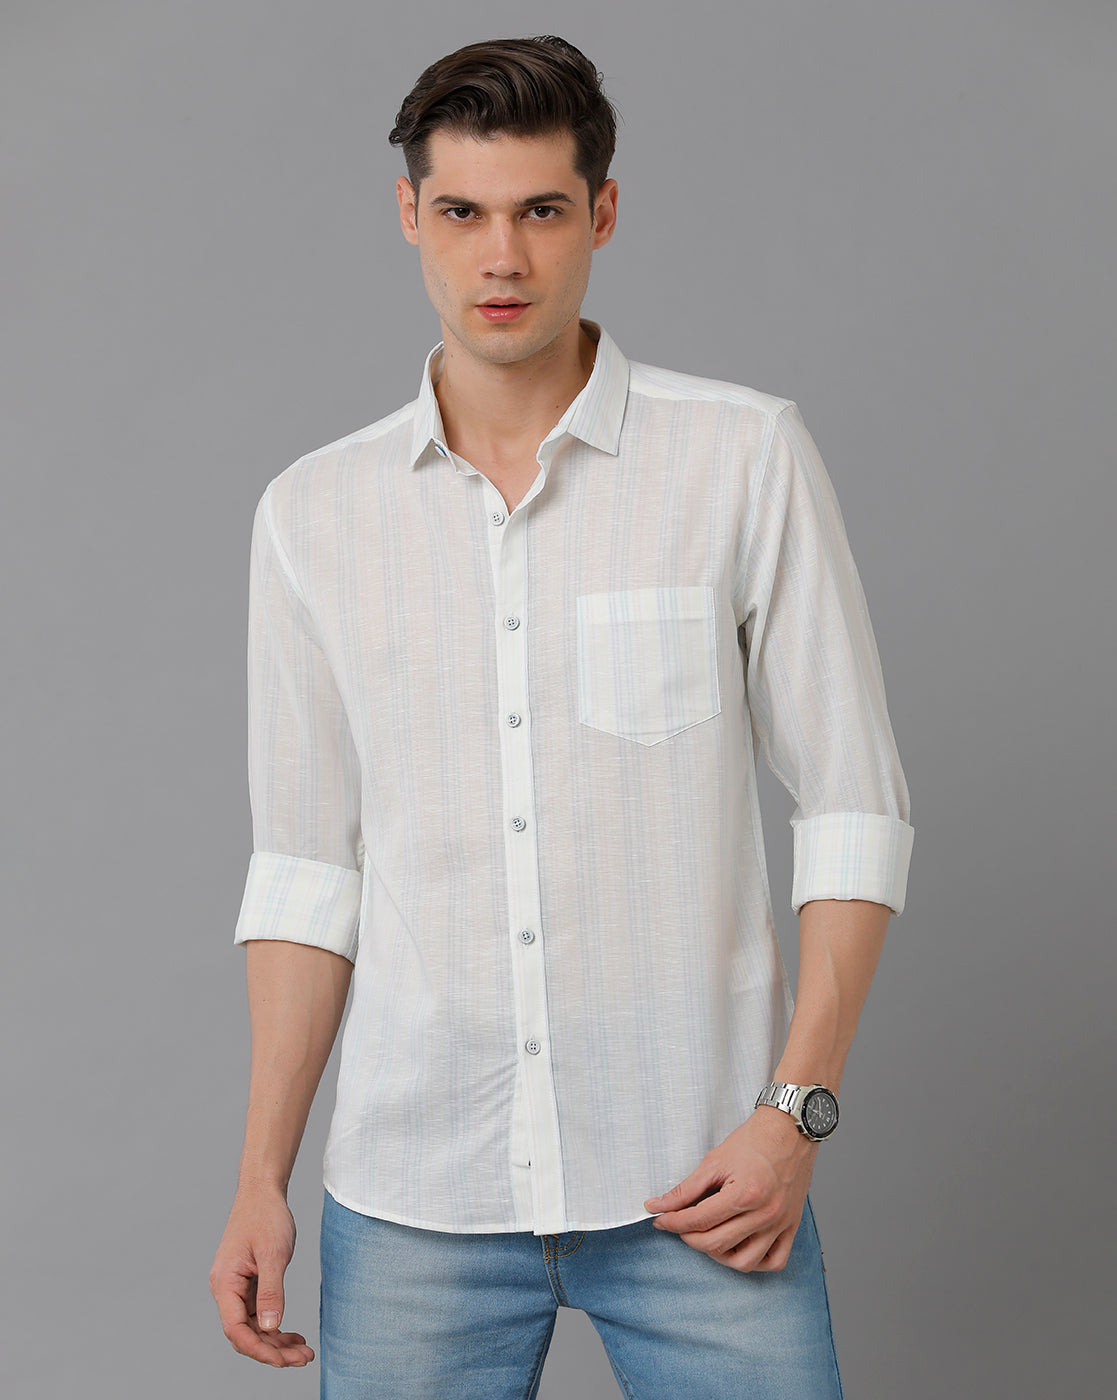 White striped casual shirt for men